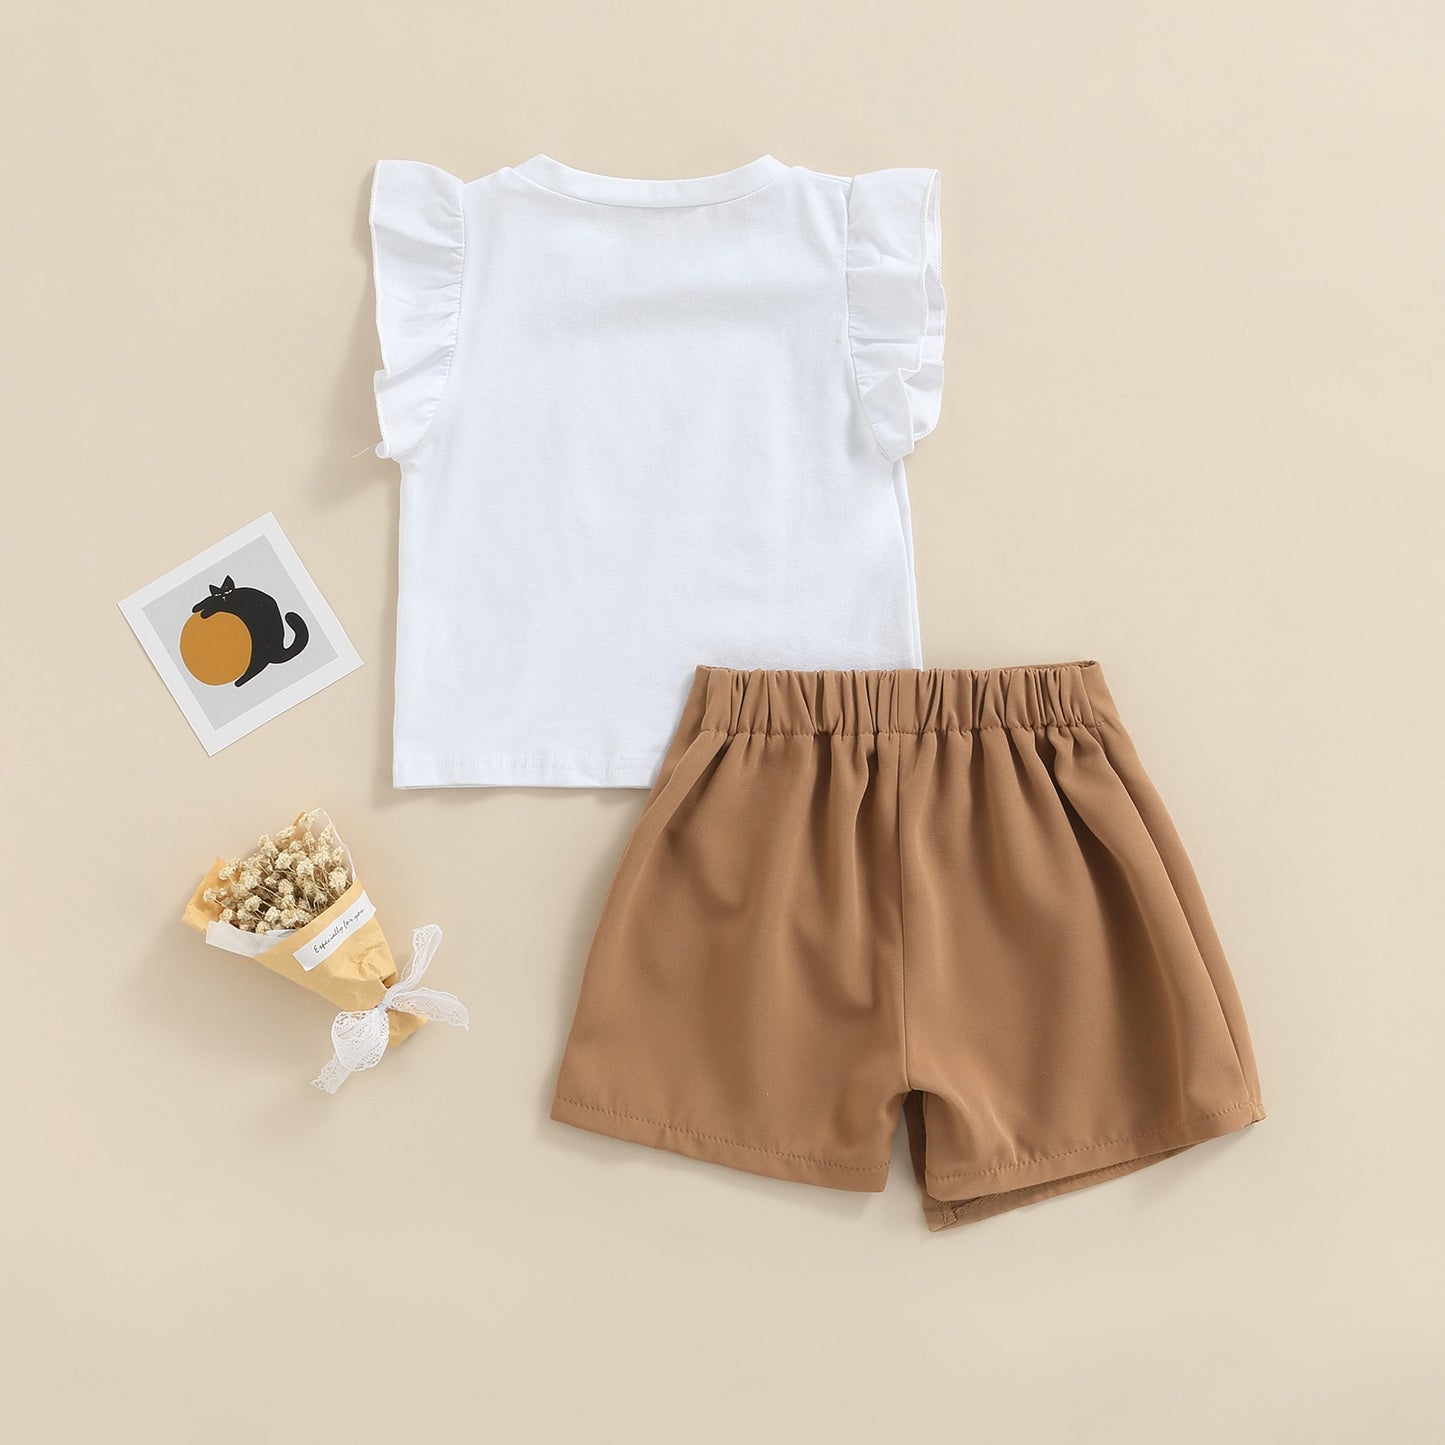 Baby Girls Fashion Clothes Sets Summer Letter Short Sleeve Tops Bowknot Shorts 2pcs Outfits - BTGO8382